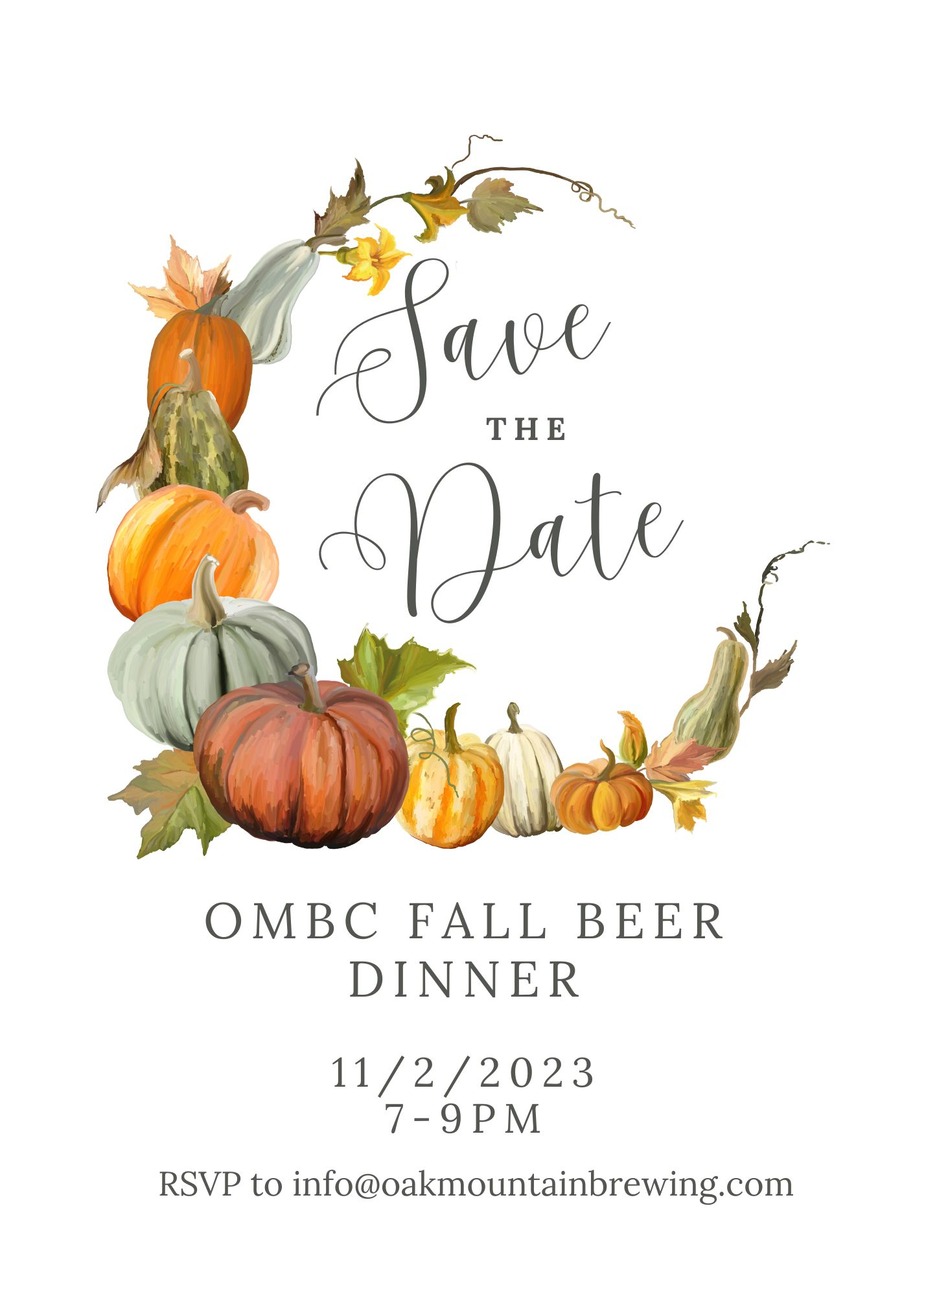 OMBC Fall Beer Dinner event photo